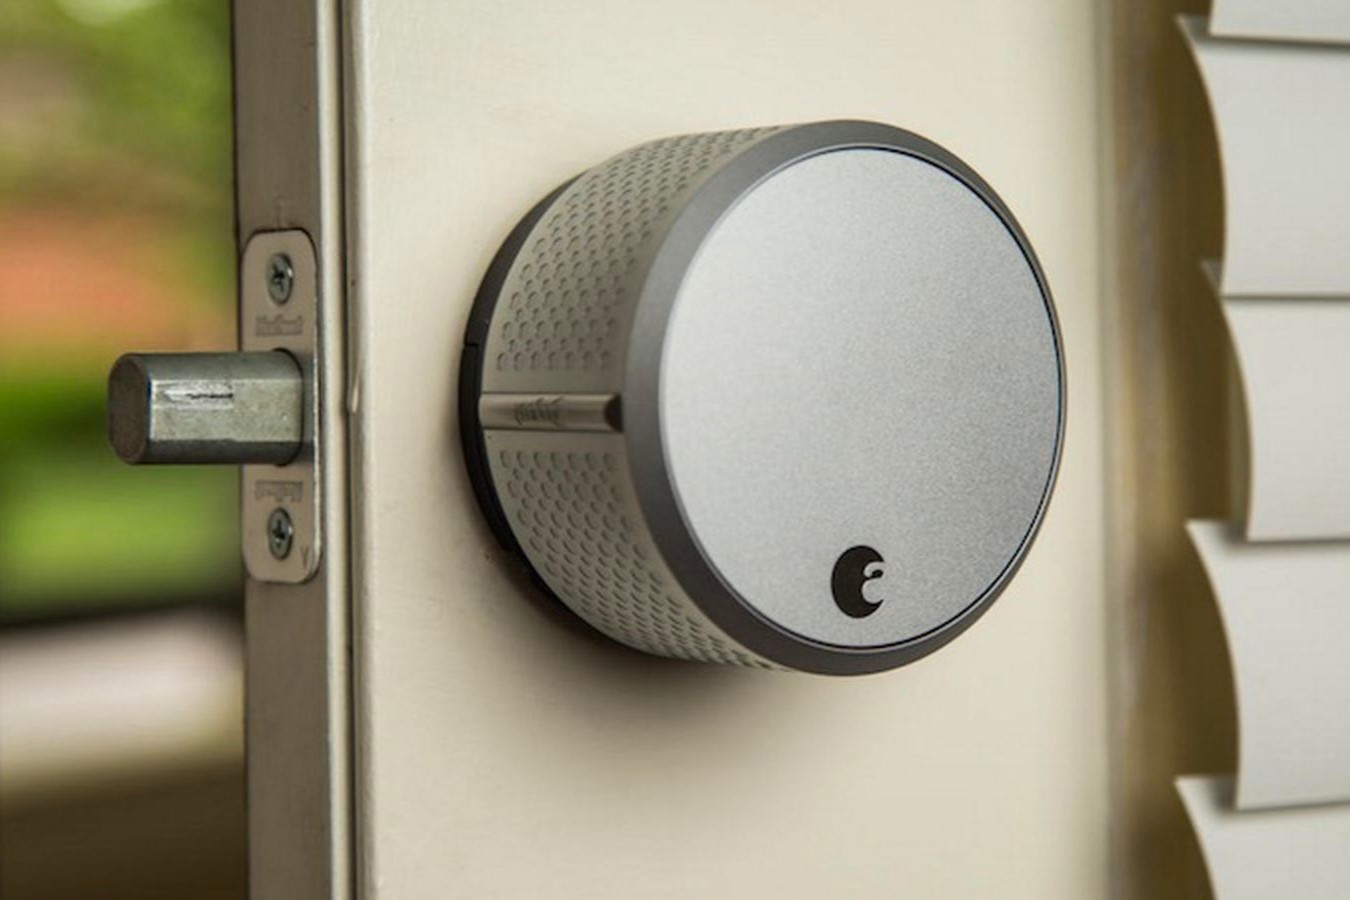 What Door Locks Are Compatible With Amazon Echo